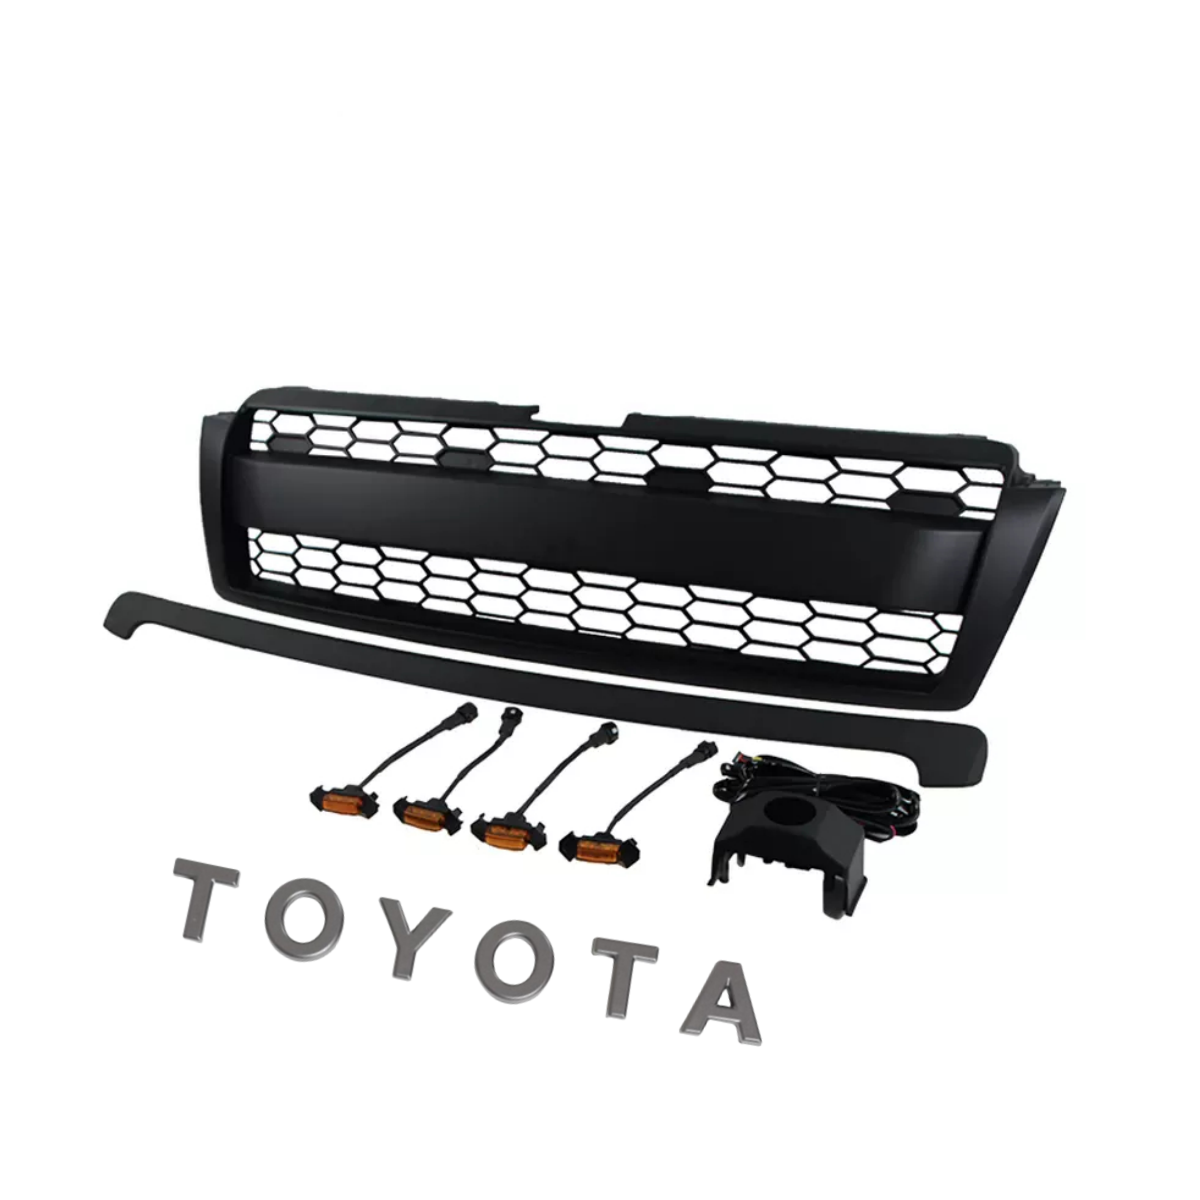 {WildWell}{Toyota Grill}-{Toyota Land Cruiser Grill 2010-2014/3}-Right